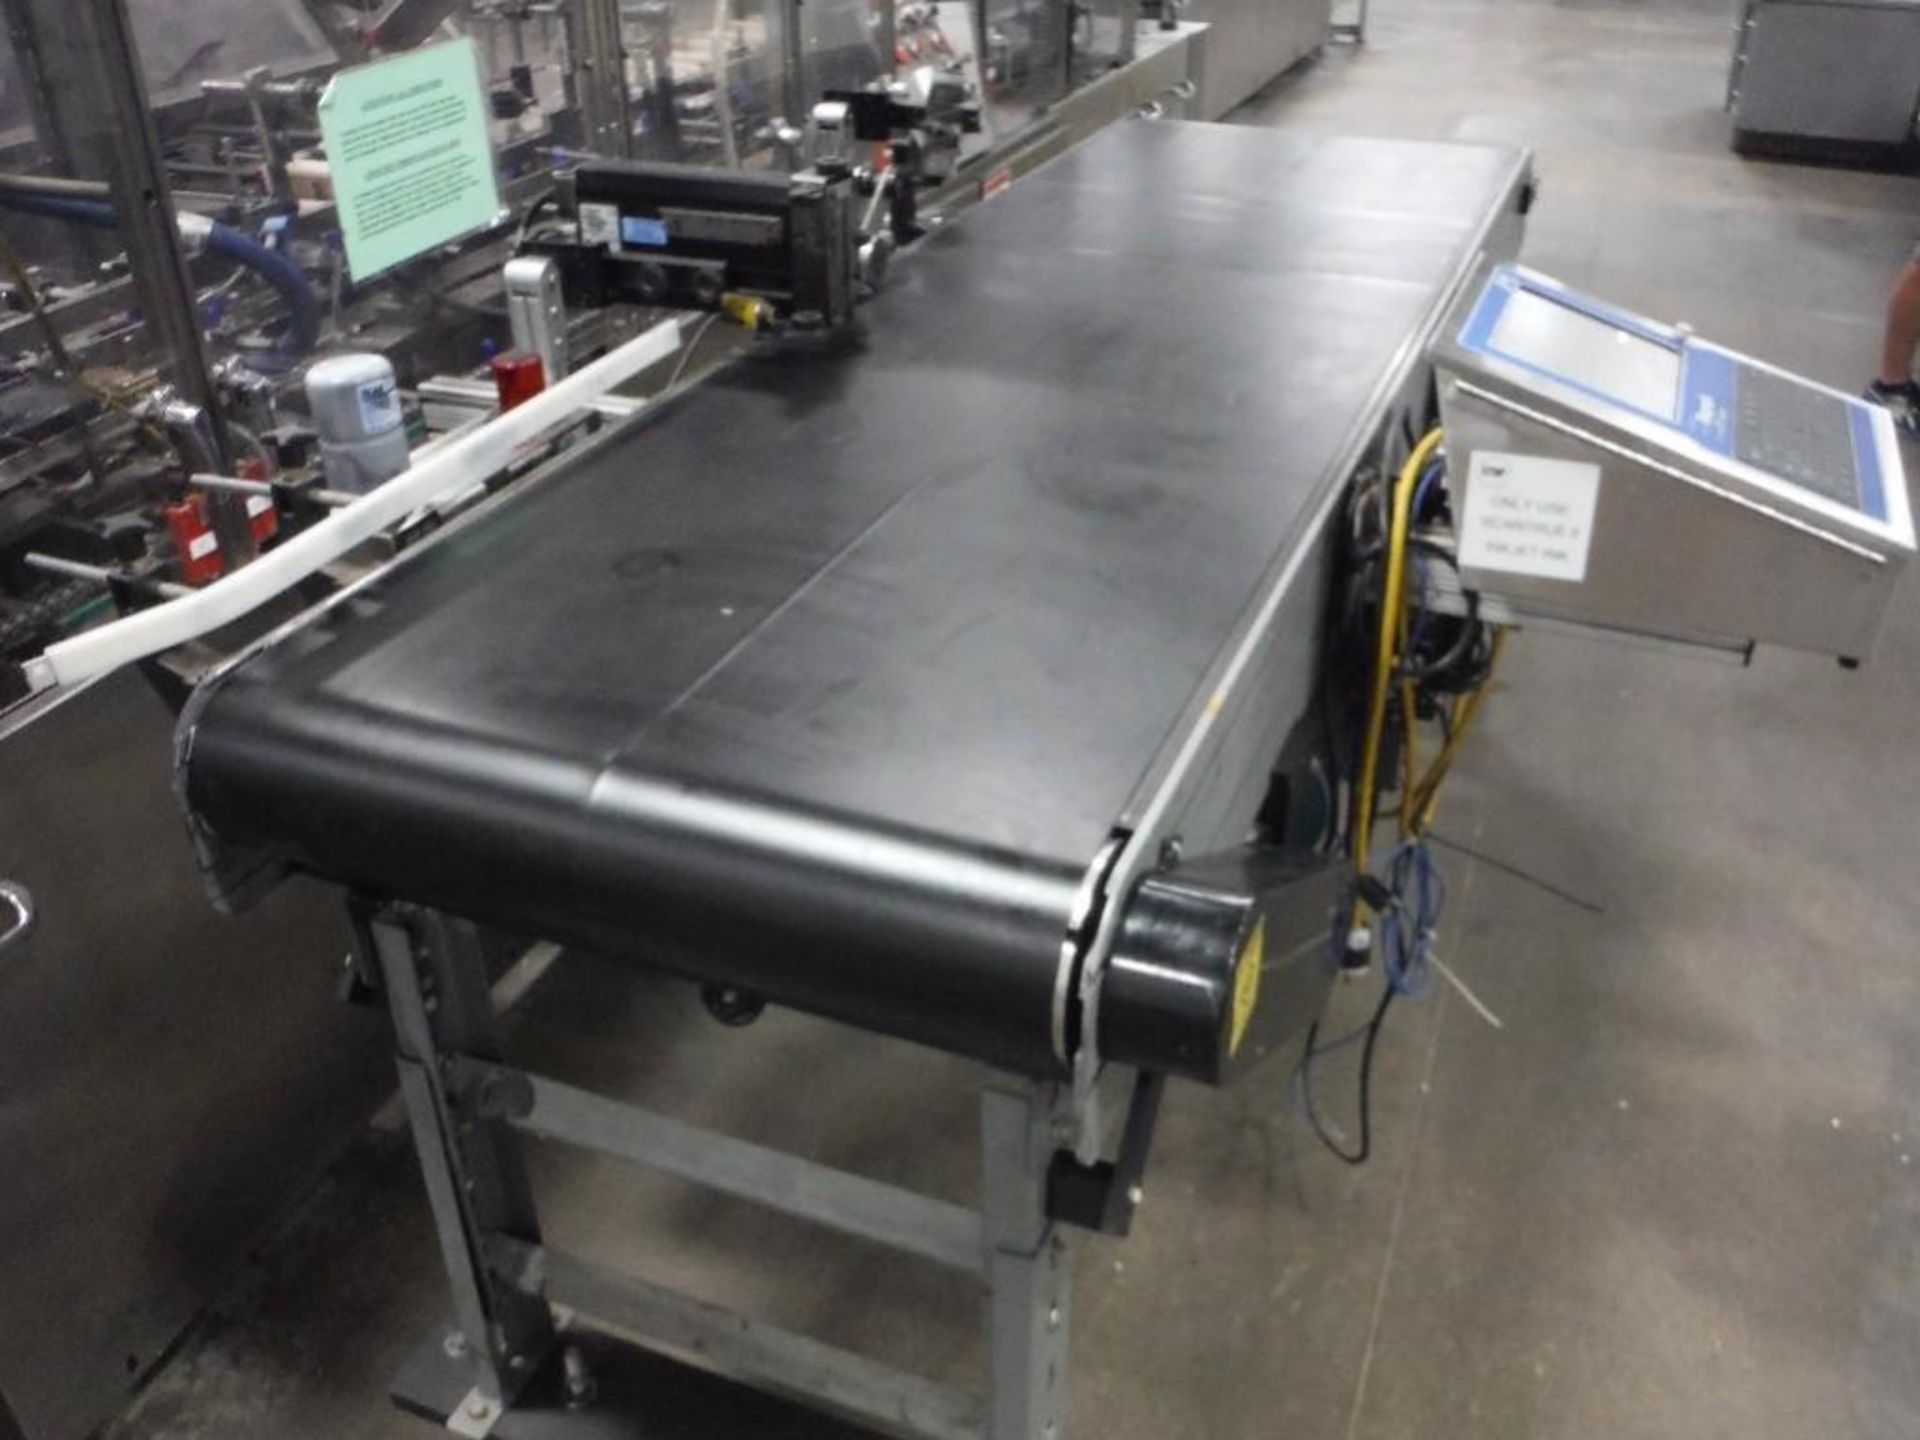 Diagraph IJ3000 xls ink jet coder with conveyor bed, 92 in. long x 27 in. wide x 40 in. tall, steel - Image 6 of 7